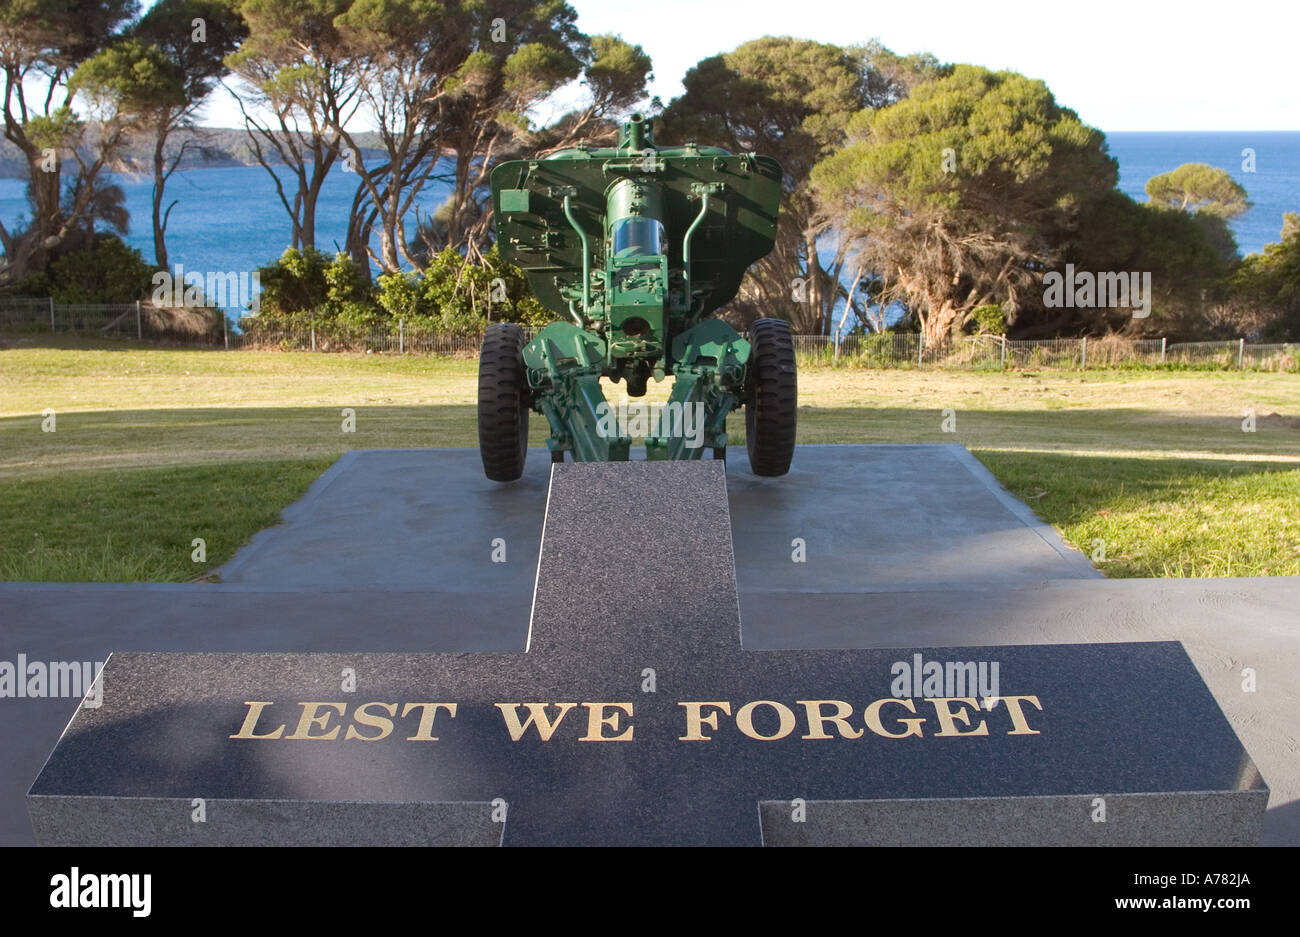 Lest We Forget - Eden, New South Wales, Australia. Stock Photo